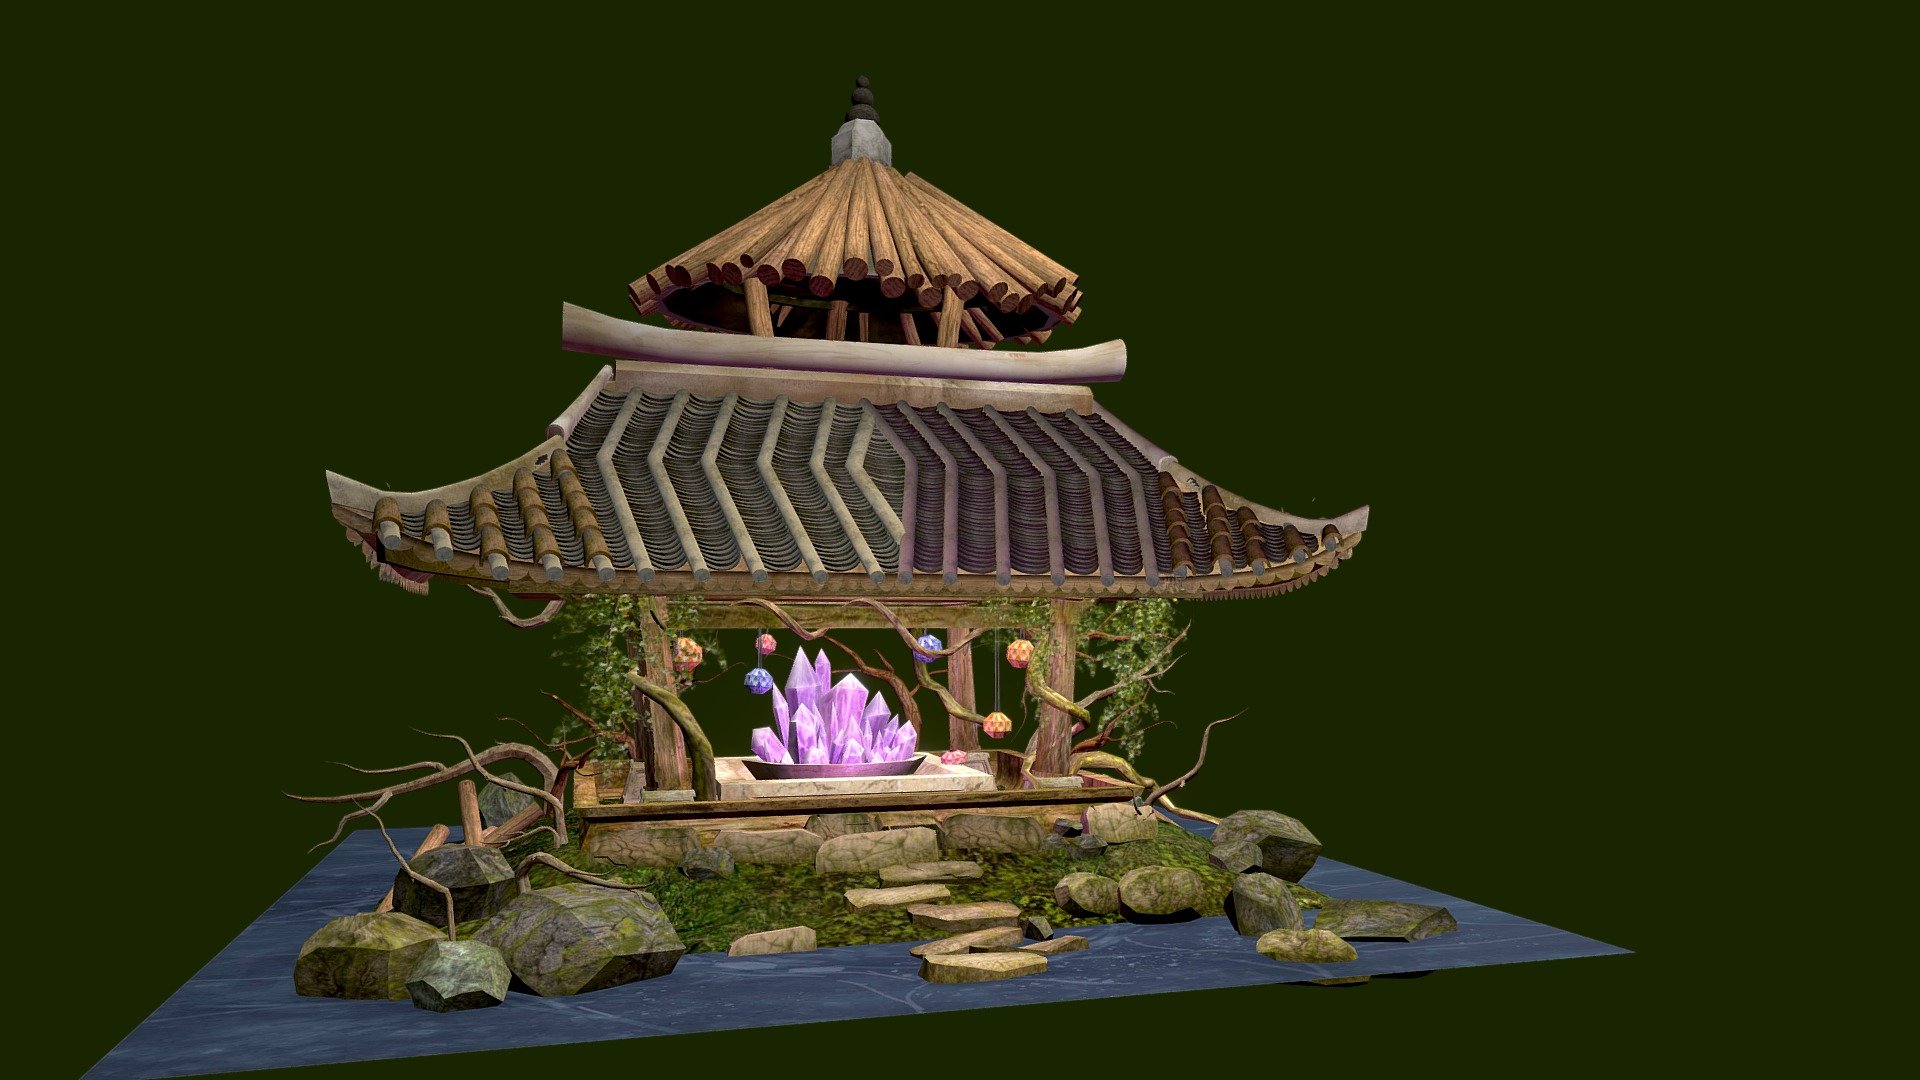 An old Korean Temple (Sawon) with a twist of fantasy by including the Amethyst Crystals.
Stylized texture and handpainted to give a more semi-realistic style 3d model